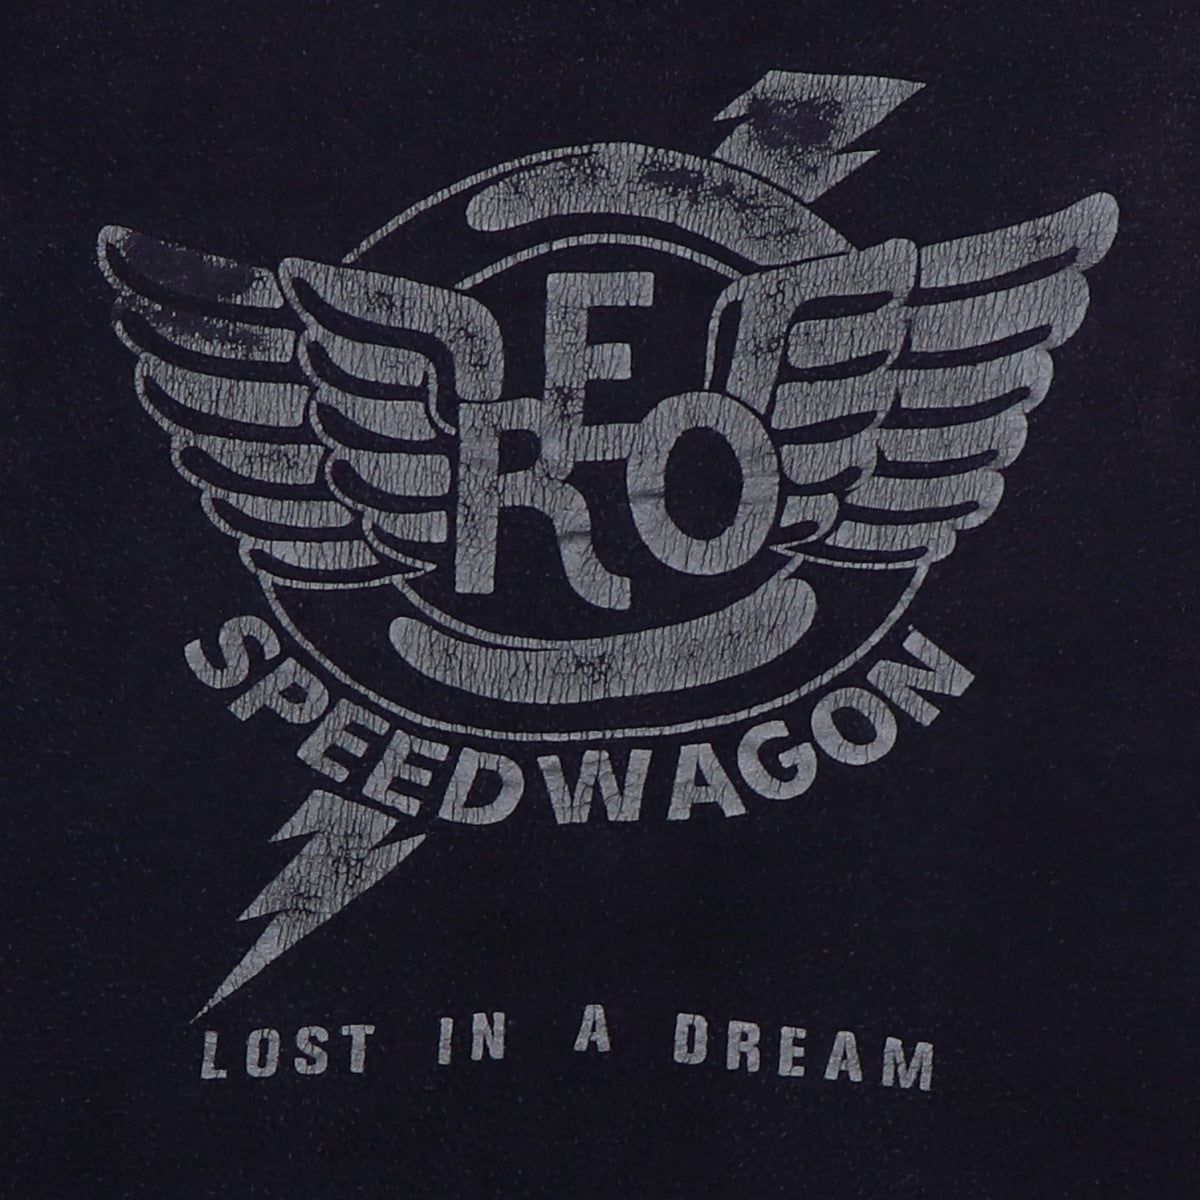 1974 REO Speedwagon Lost In A Dream Shirt